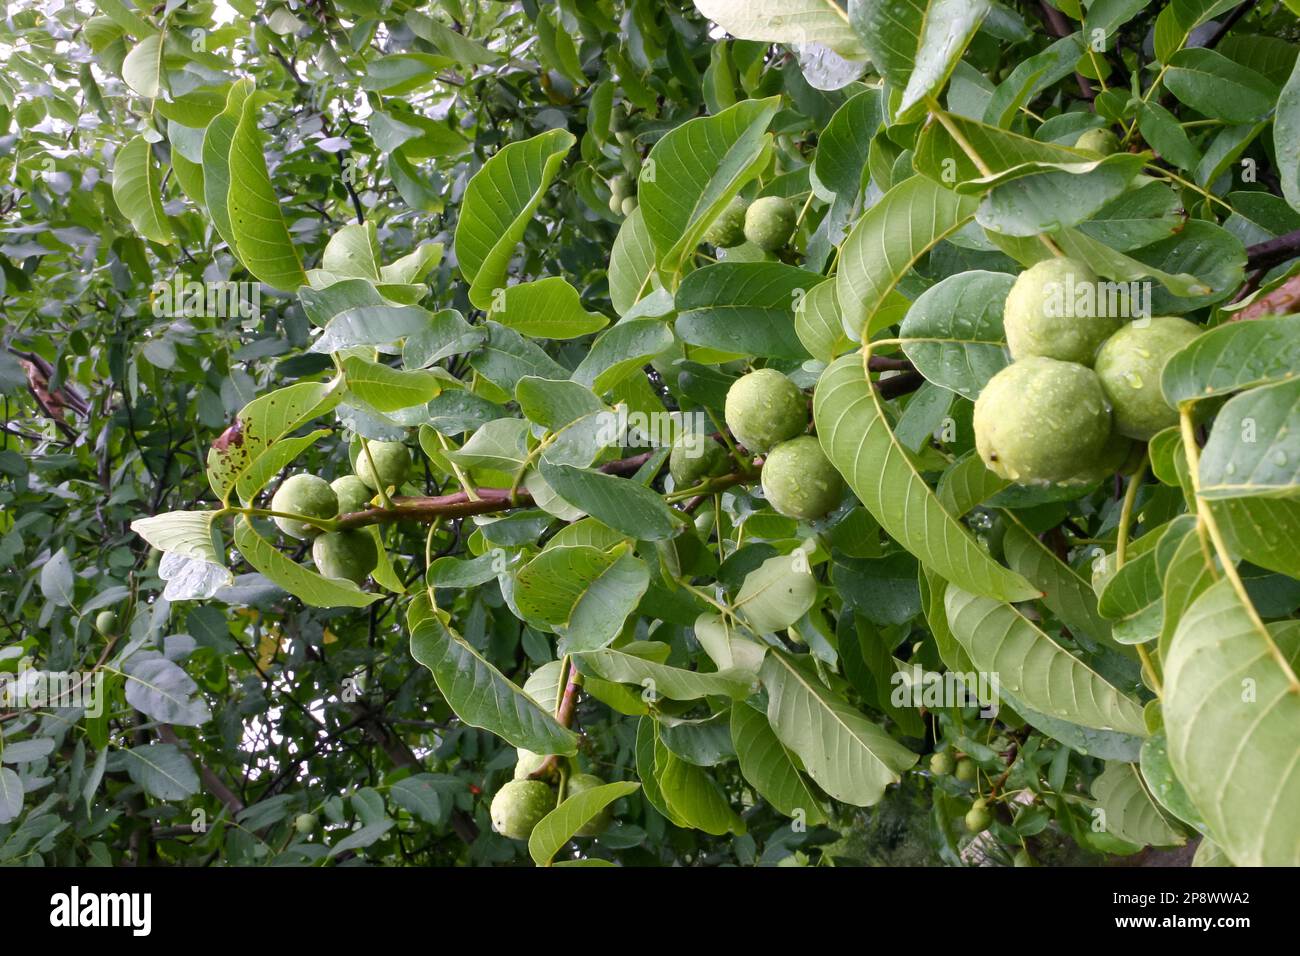 Green walnuts on a tree branch with leaves in the garden Stock Photo